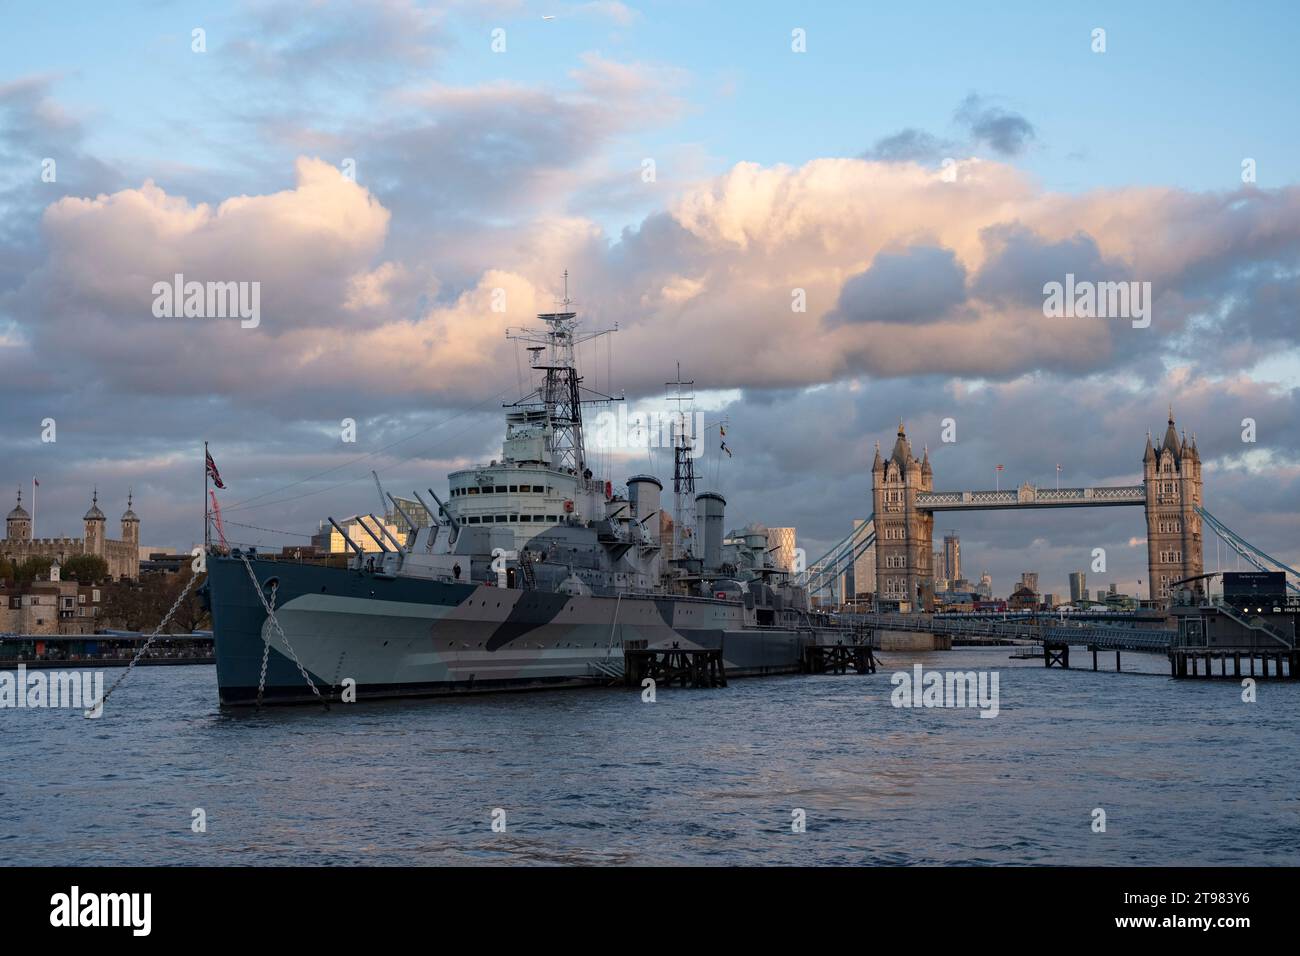 HMS Belfast on the River Thames looking towards Tower Bridge on 15th November 2023 in London, United Kingdom. HMS Belfast is a museum ship, permanently moored in London on the River Thames. She was originally a Royal Navy light cruiser and served during the Second World War and Korean War. Stock Photo